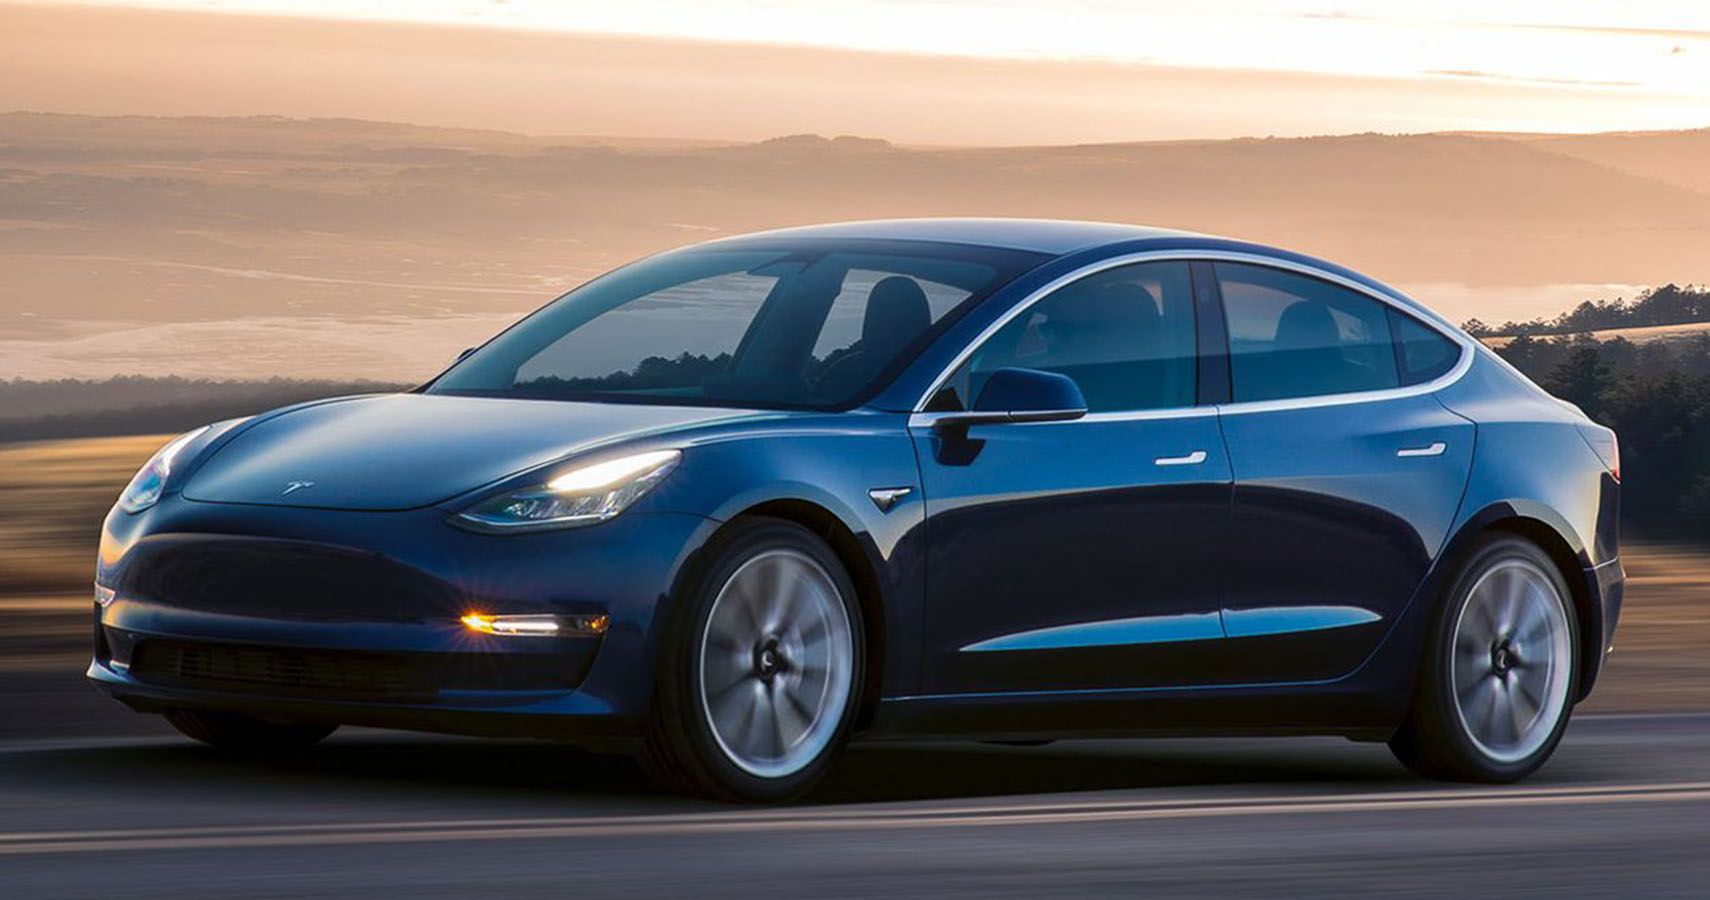 Till now, Tesla’s range stands unchallenged and that’s a definite Tesla win